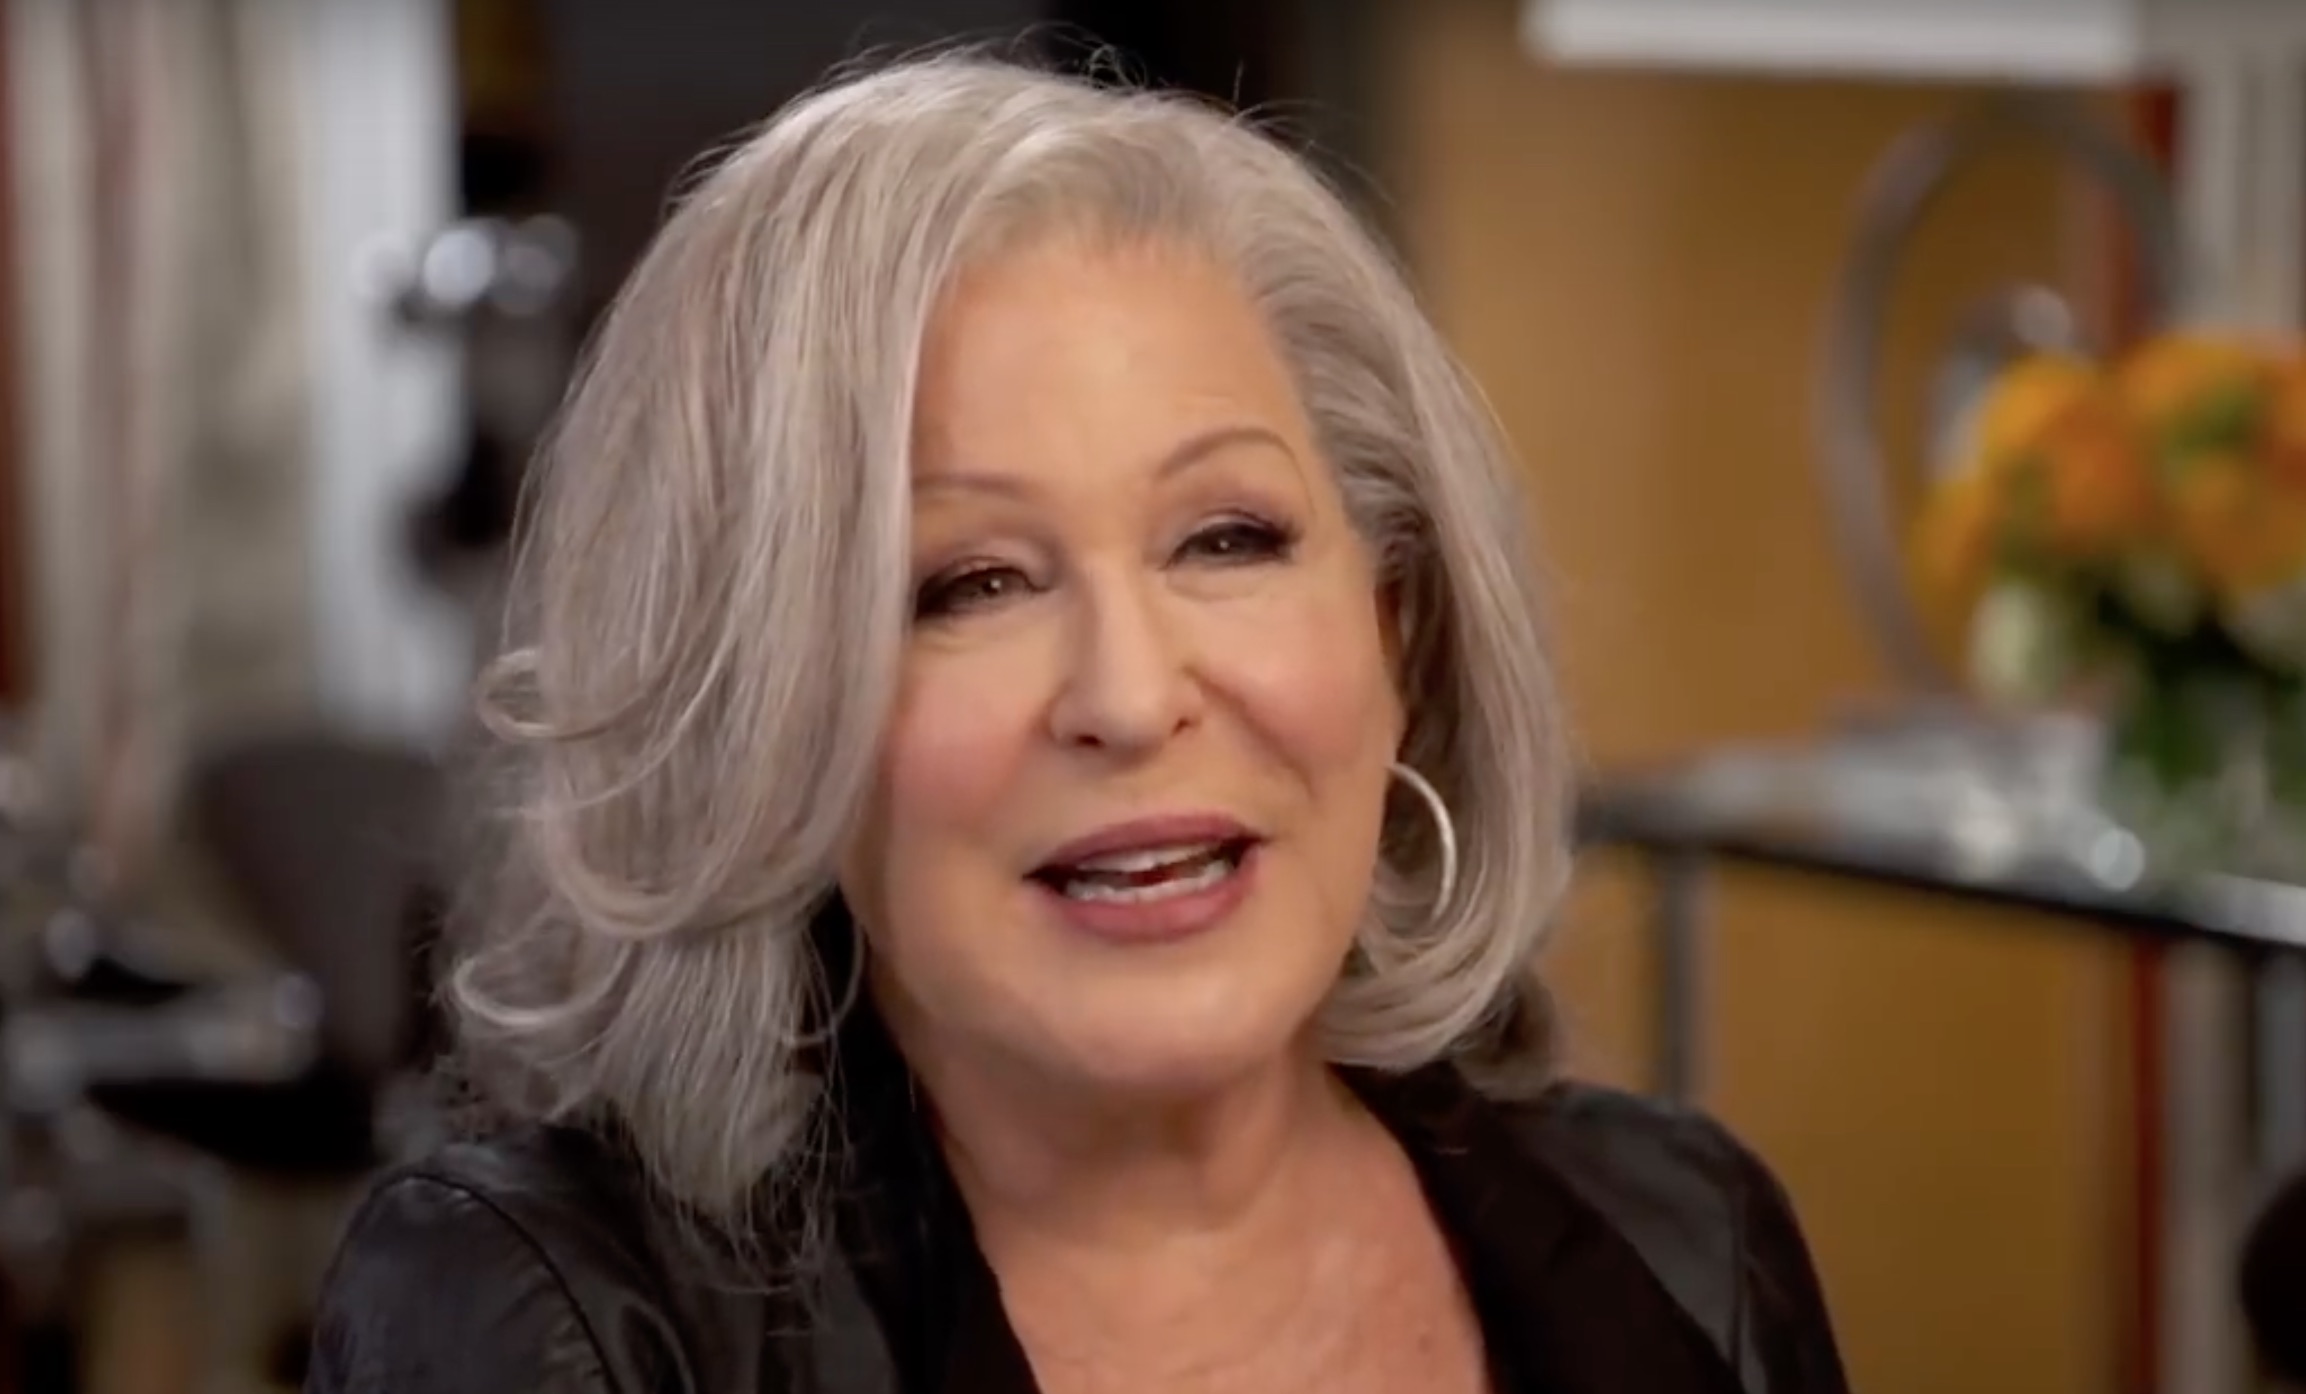 Bette Midler Panned For Fake Trump Quote